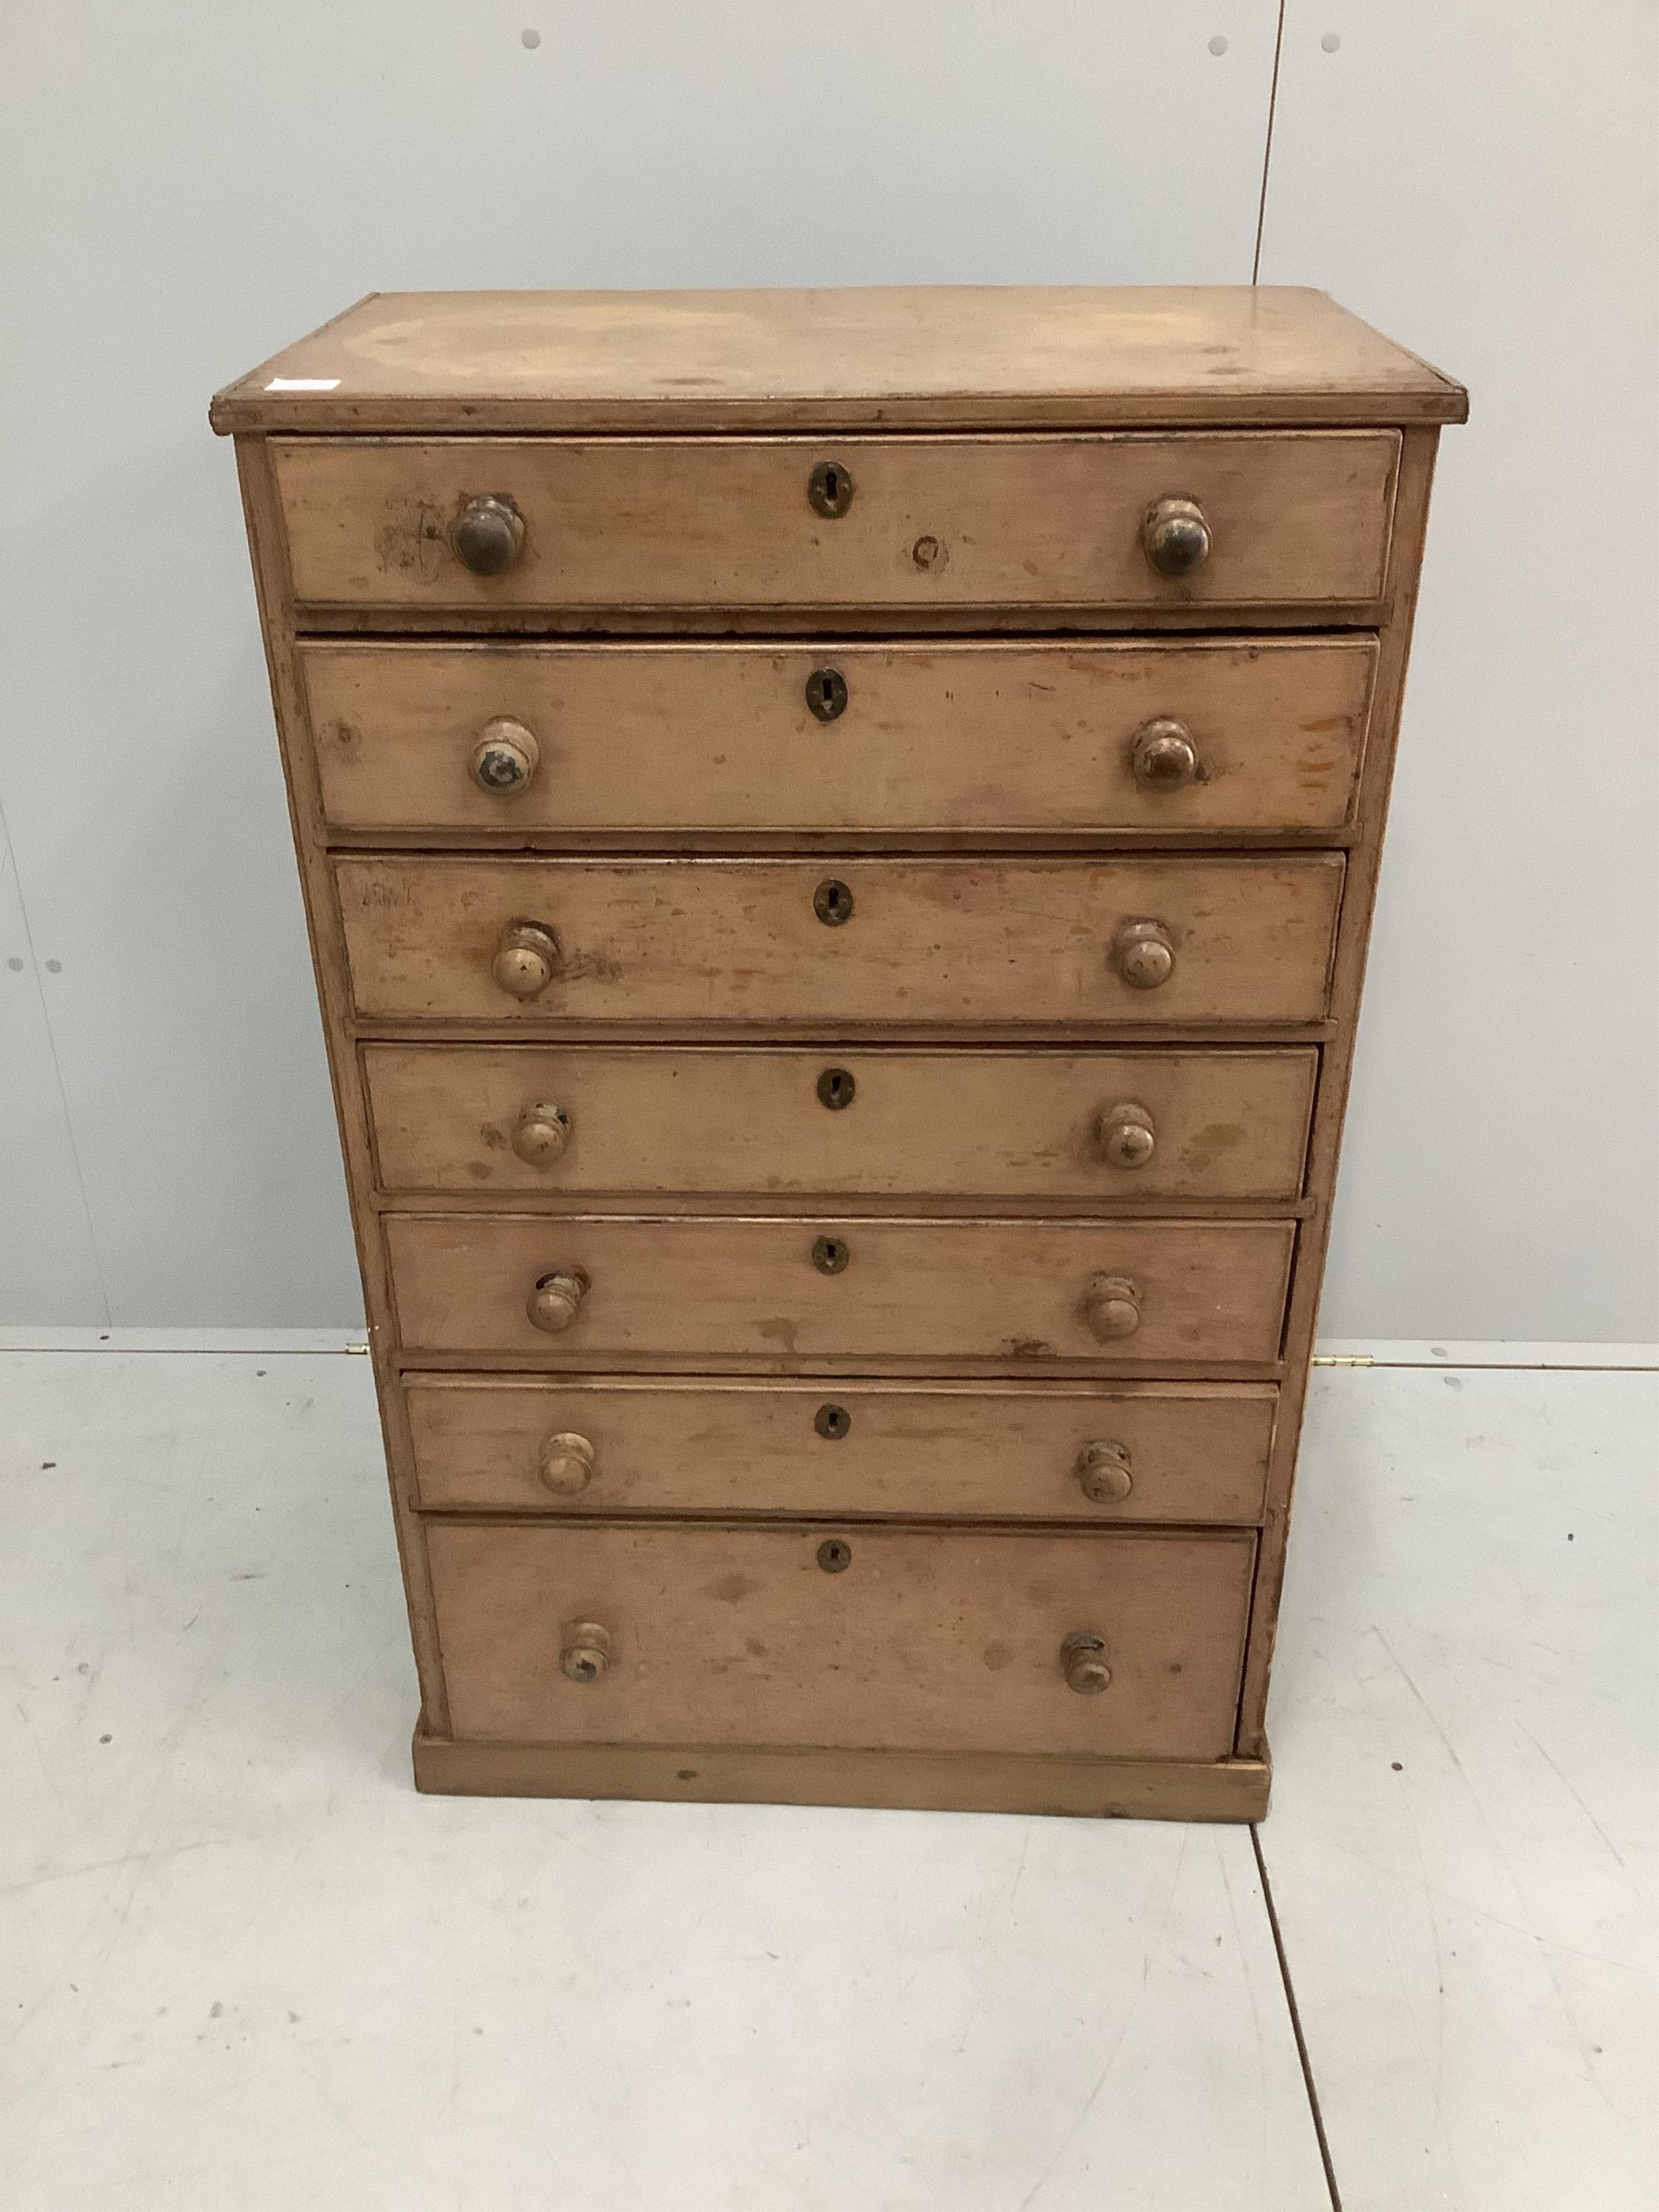 A French mid 19th century painted pine narrow chest of seven drawers, width 73cm, depth 44cm, height 117cm. Condition - fair